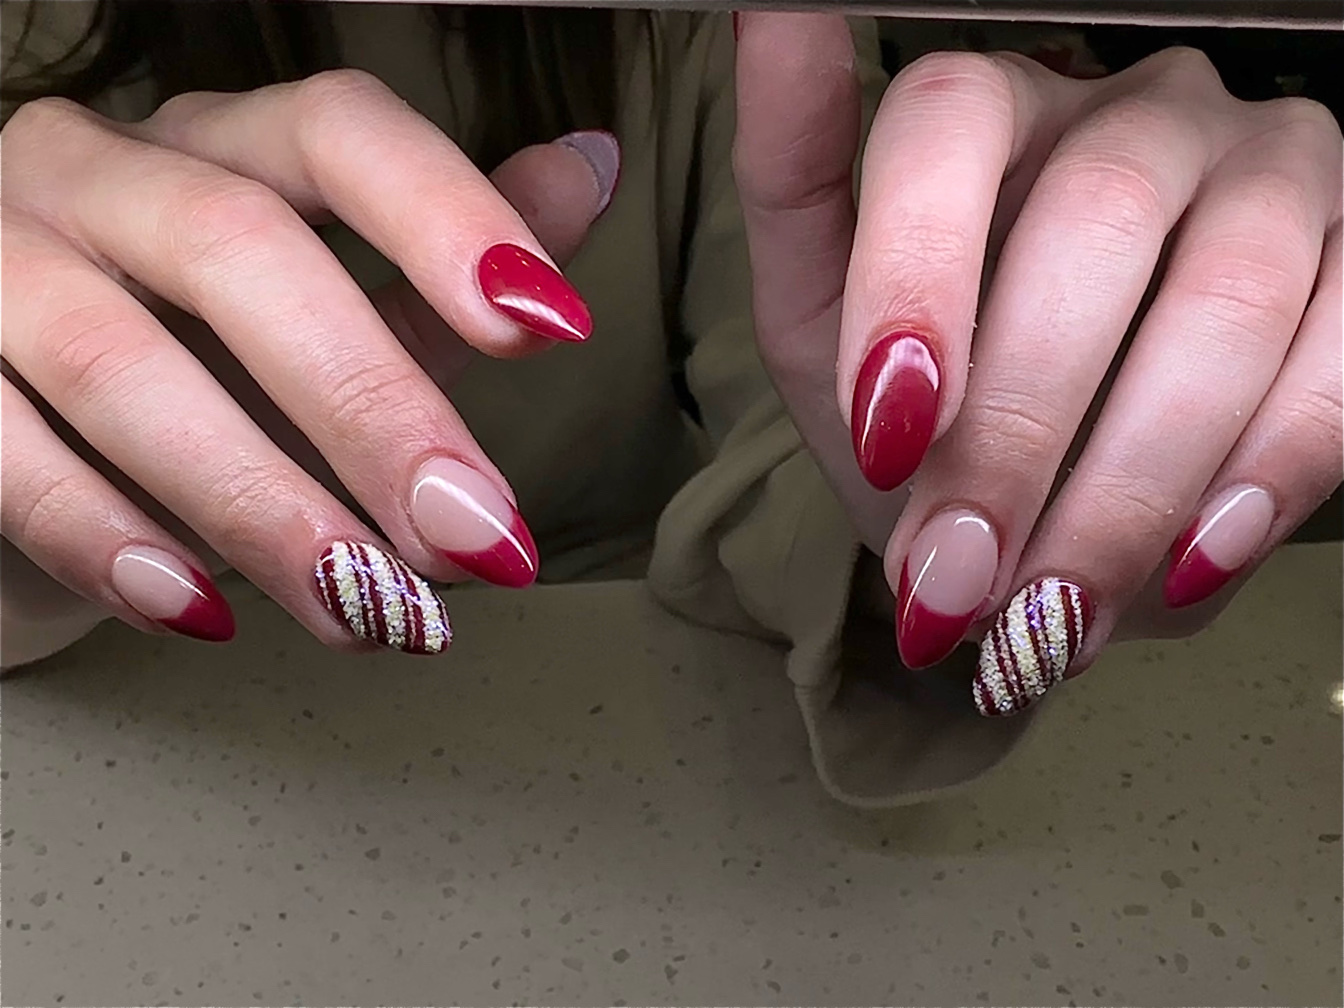 Style Nails & Spa in - Burnsville, MN | Groupon